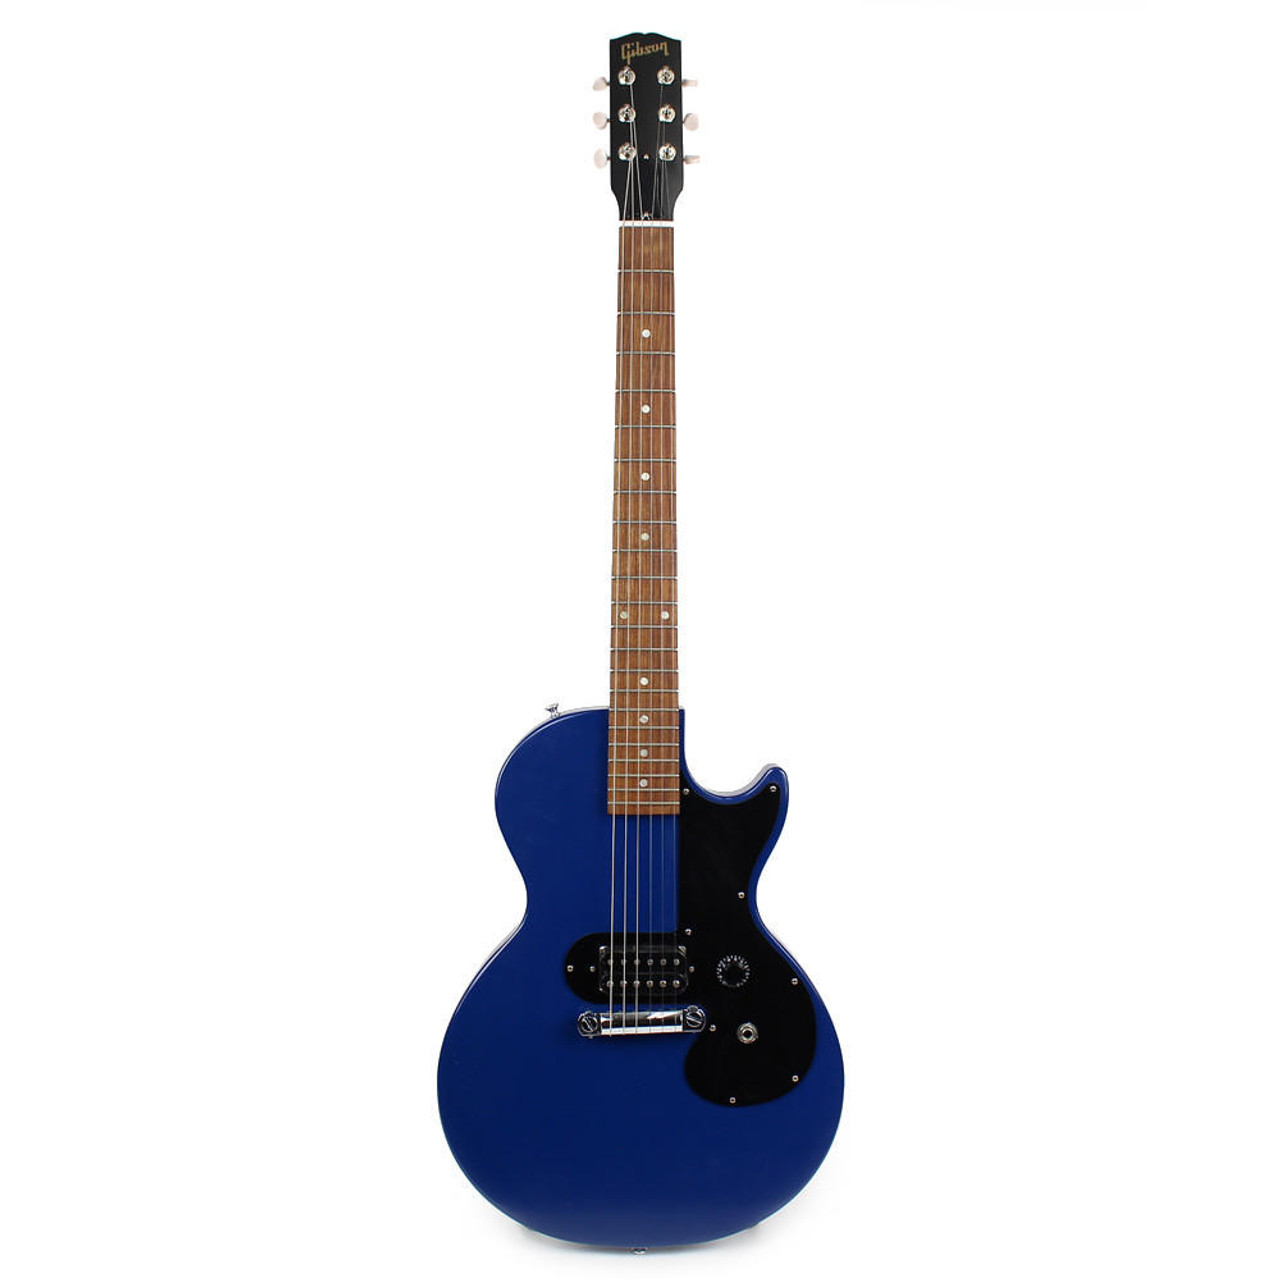 2011 Gibson Melody Maker Les Paul in Satin Blue